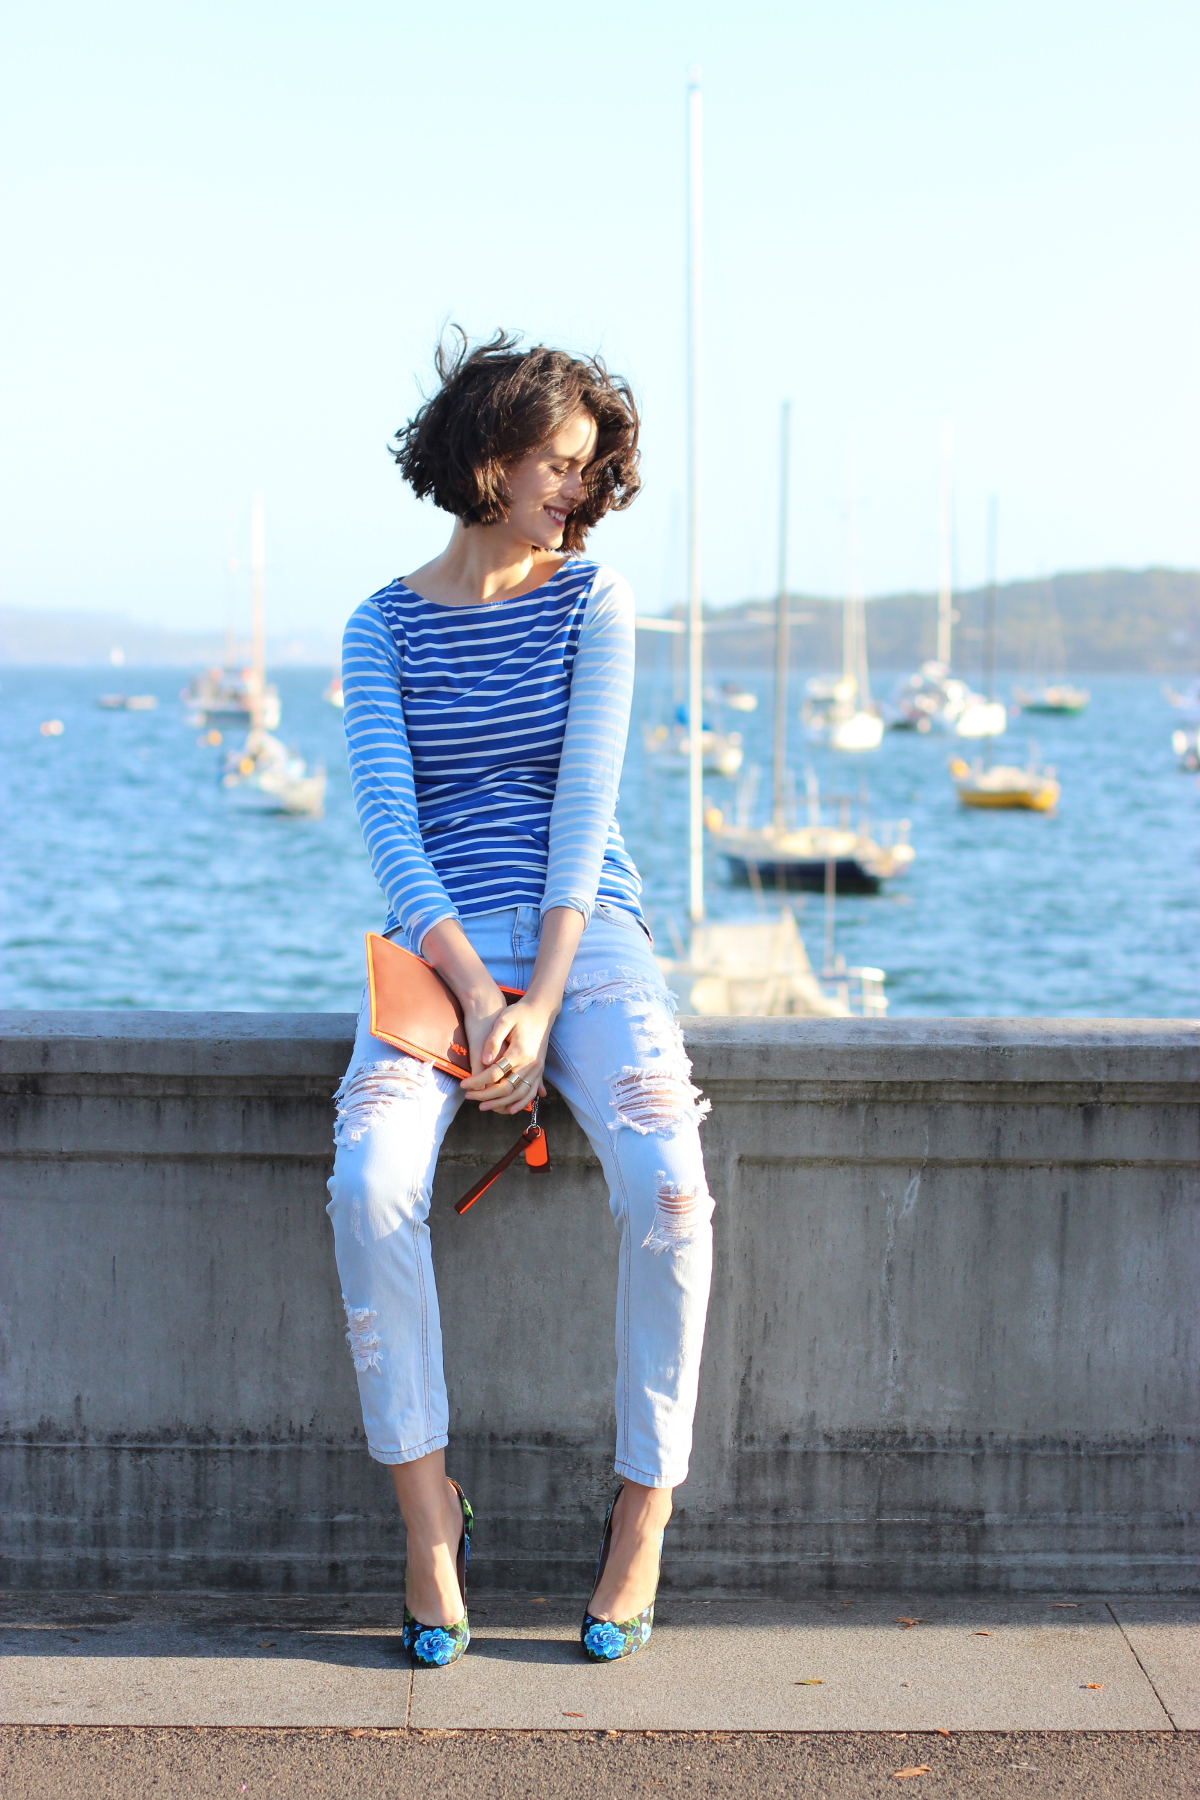 BY CHILL Chloe Hill in Boden Clothing blue breton striped top, one teaspoon denim jeans and miu miu floral heels at Rose Bay Sydney